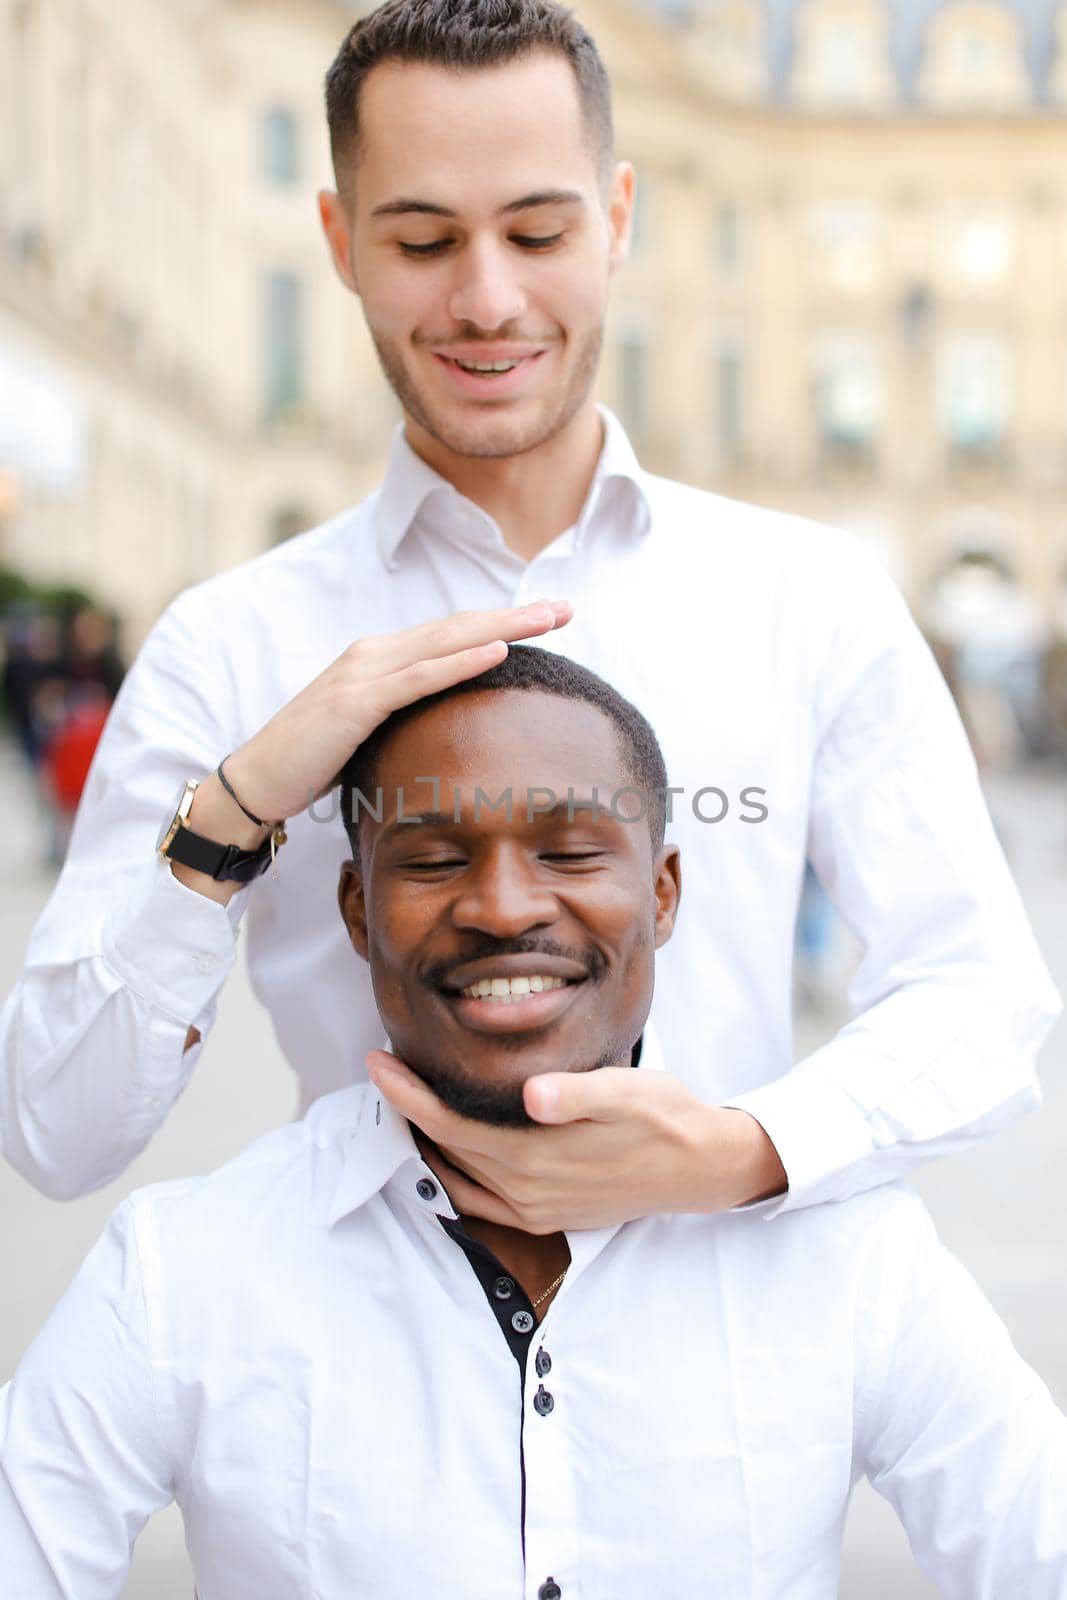 Caucasian boy holding afro american guy head by hands, wearing white shirt. Concept of stylish boy and haircut.